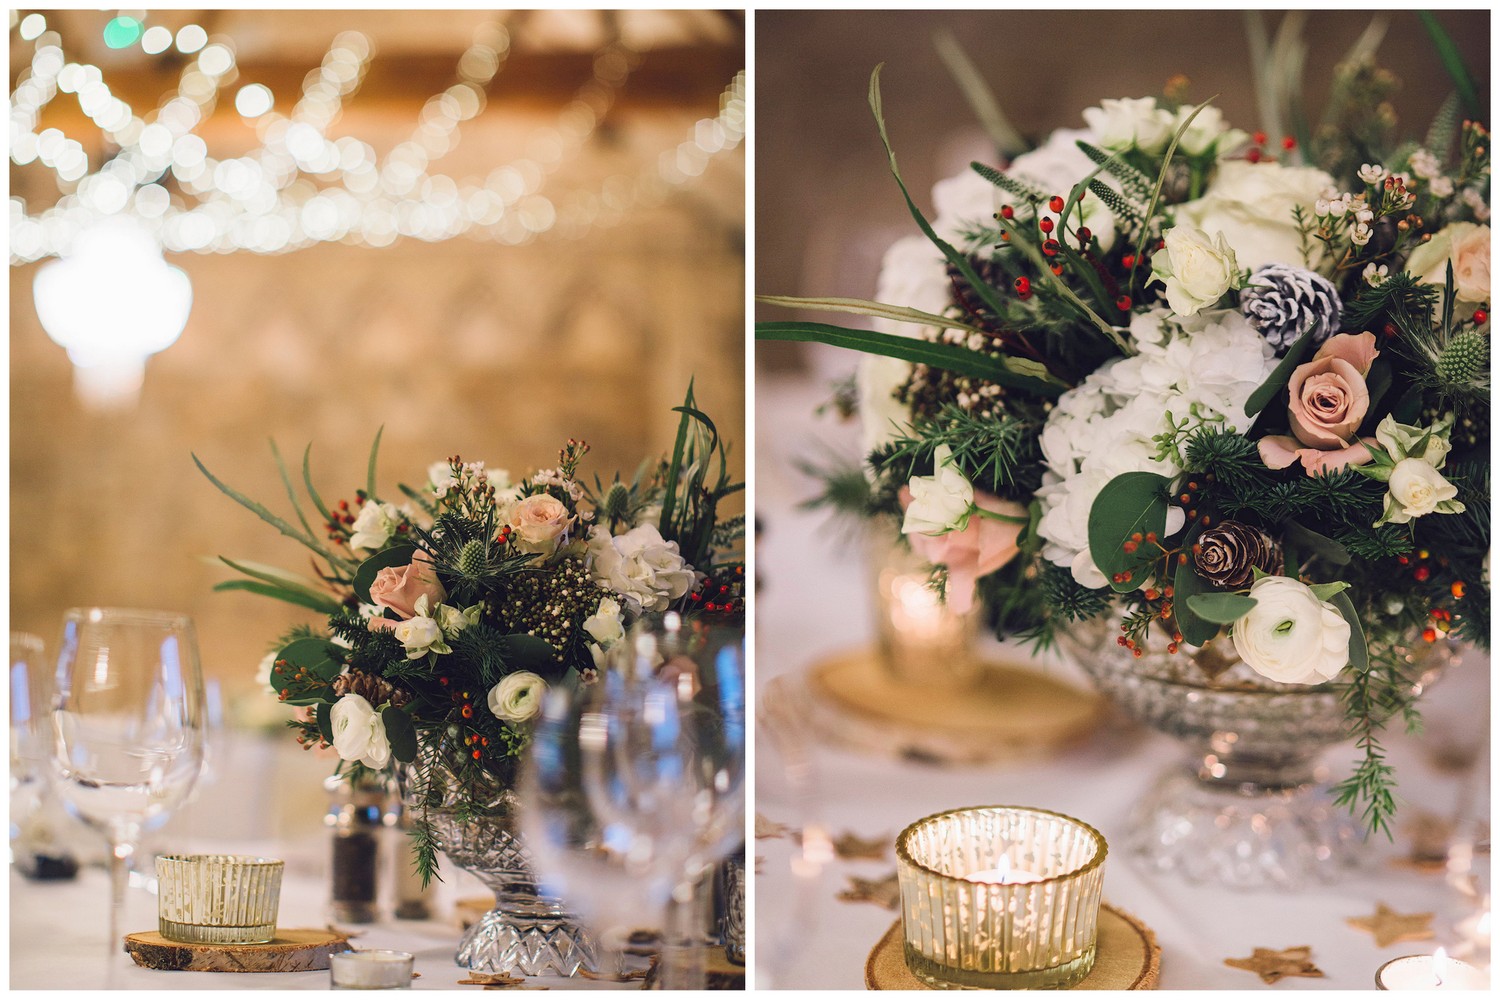 Christmas wedding flowers in white & blush at Notedly Abbey, Bucks